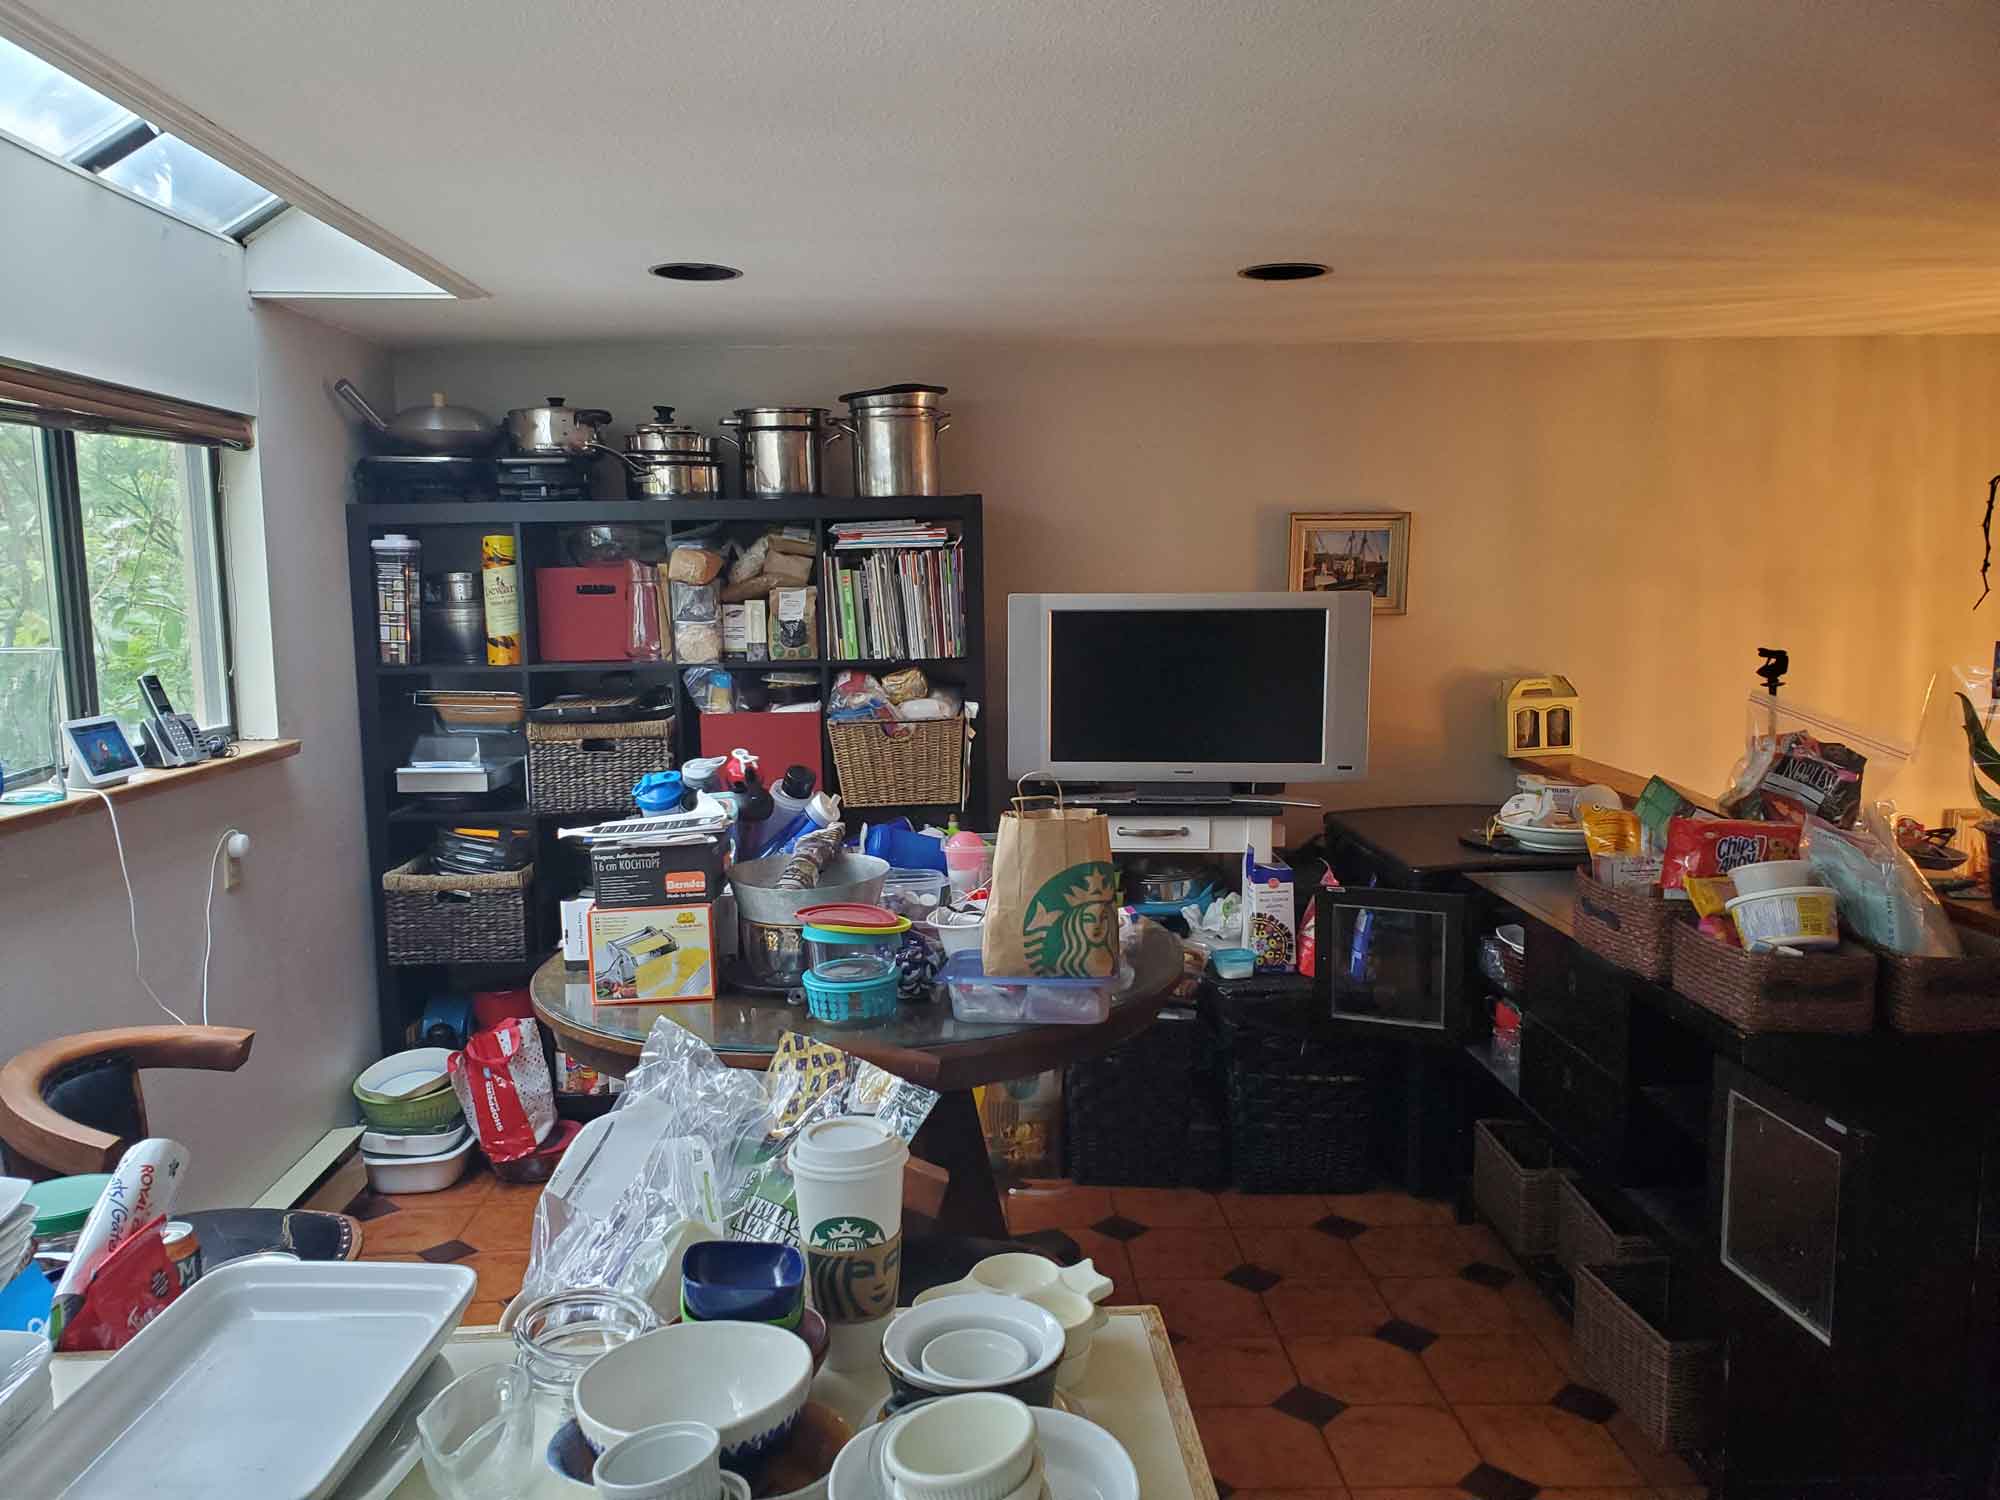 Kitchen table and counters full of items making them inaccessible